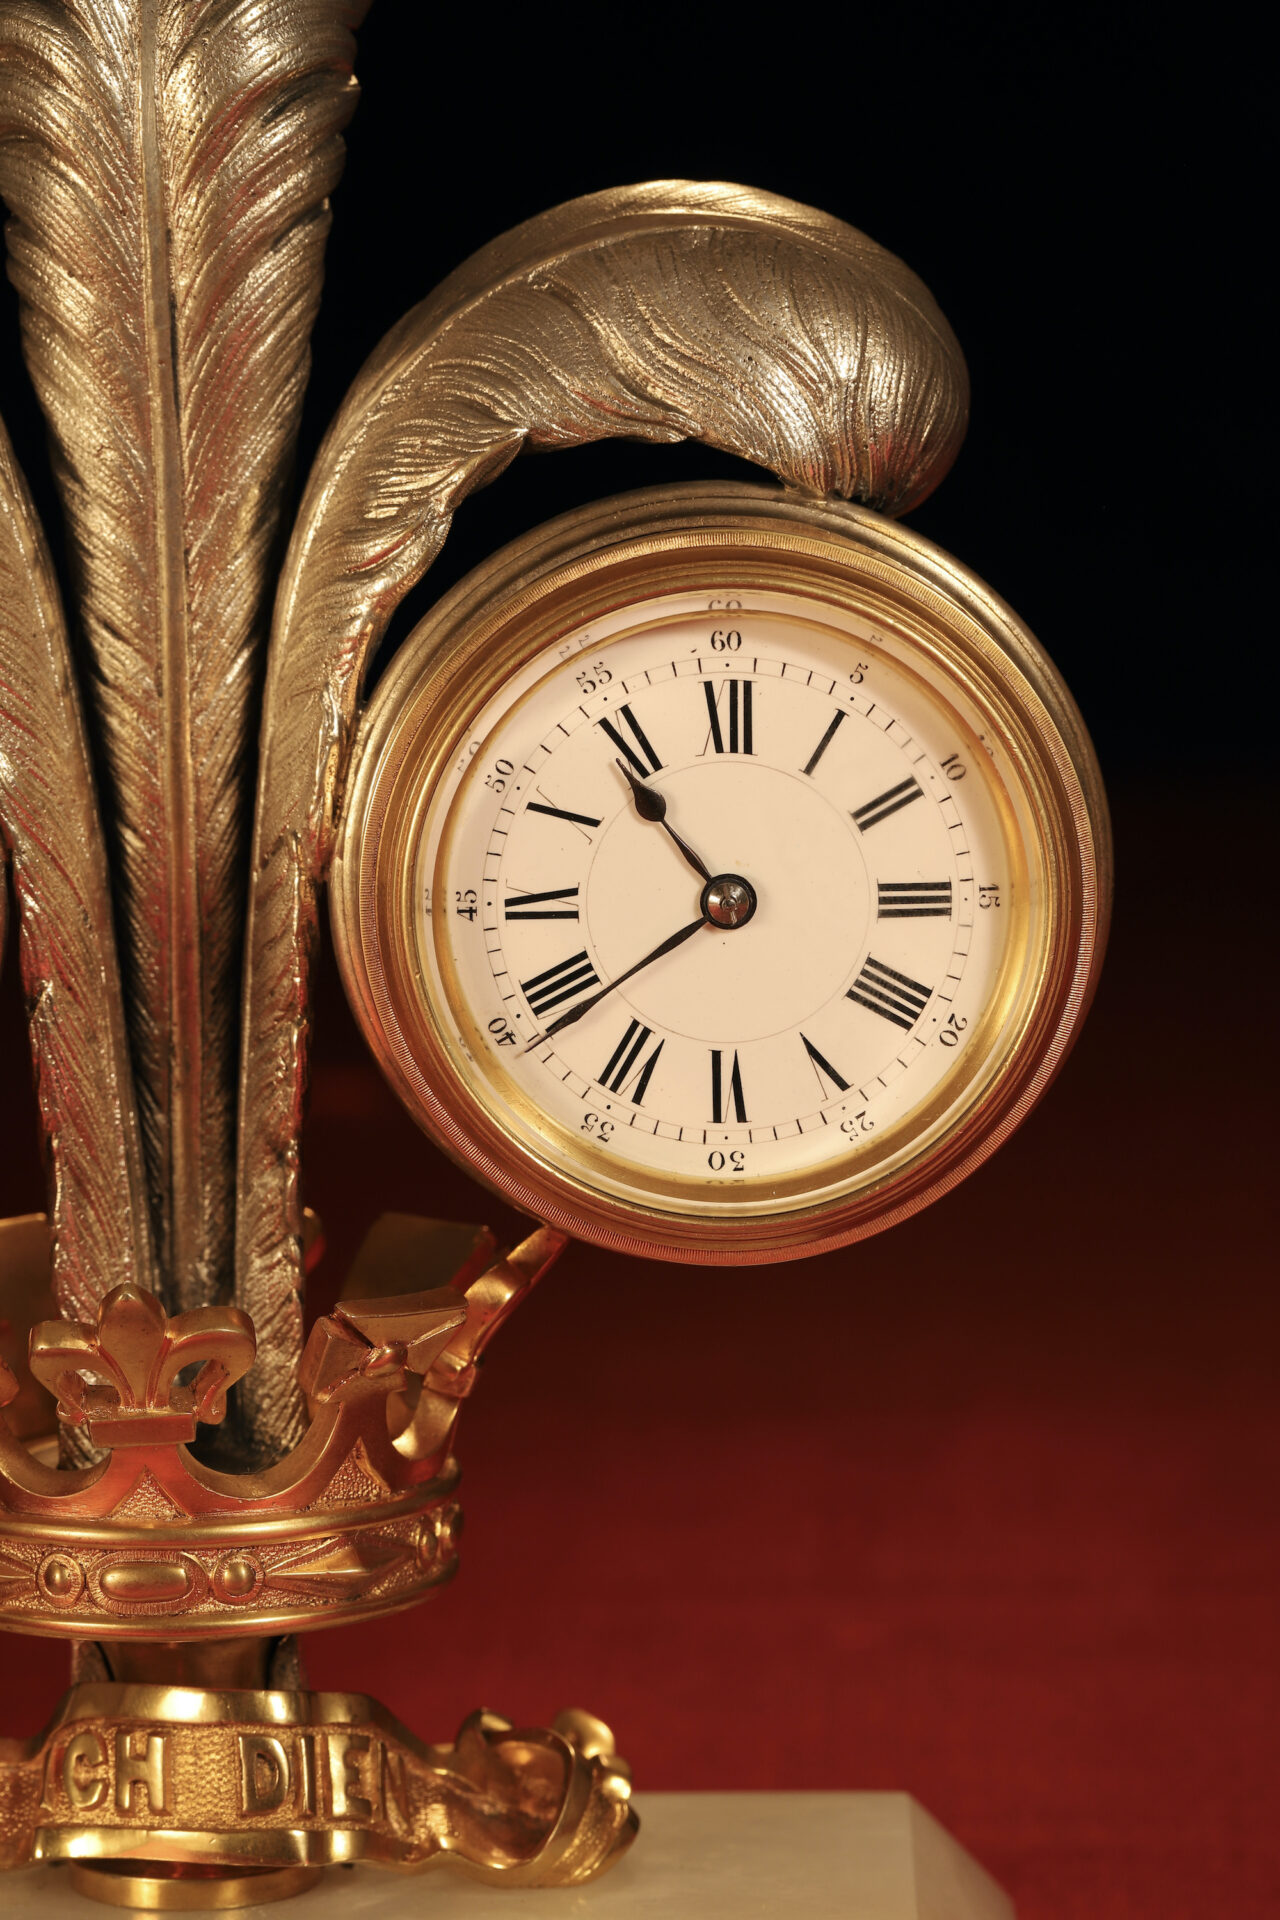 Image of clock from Prince of Wales Feathers Desk Compendium c1880